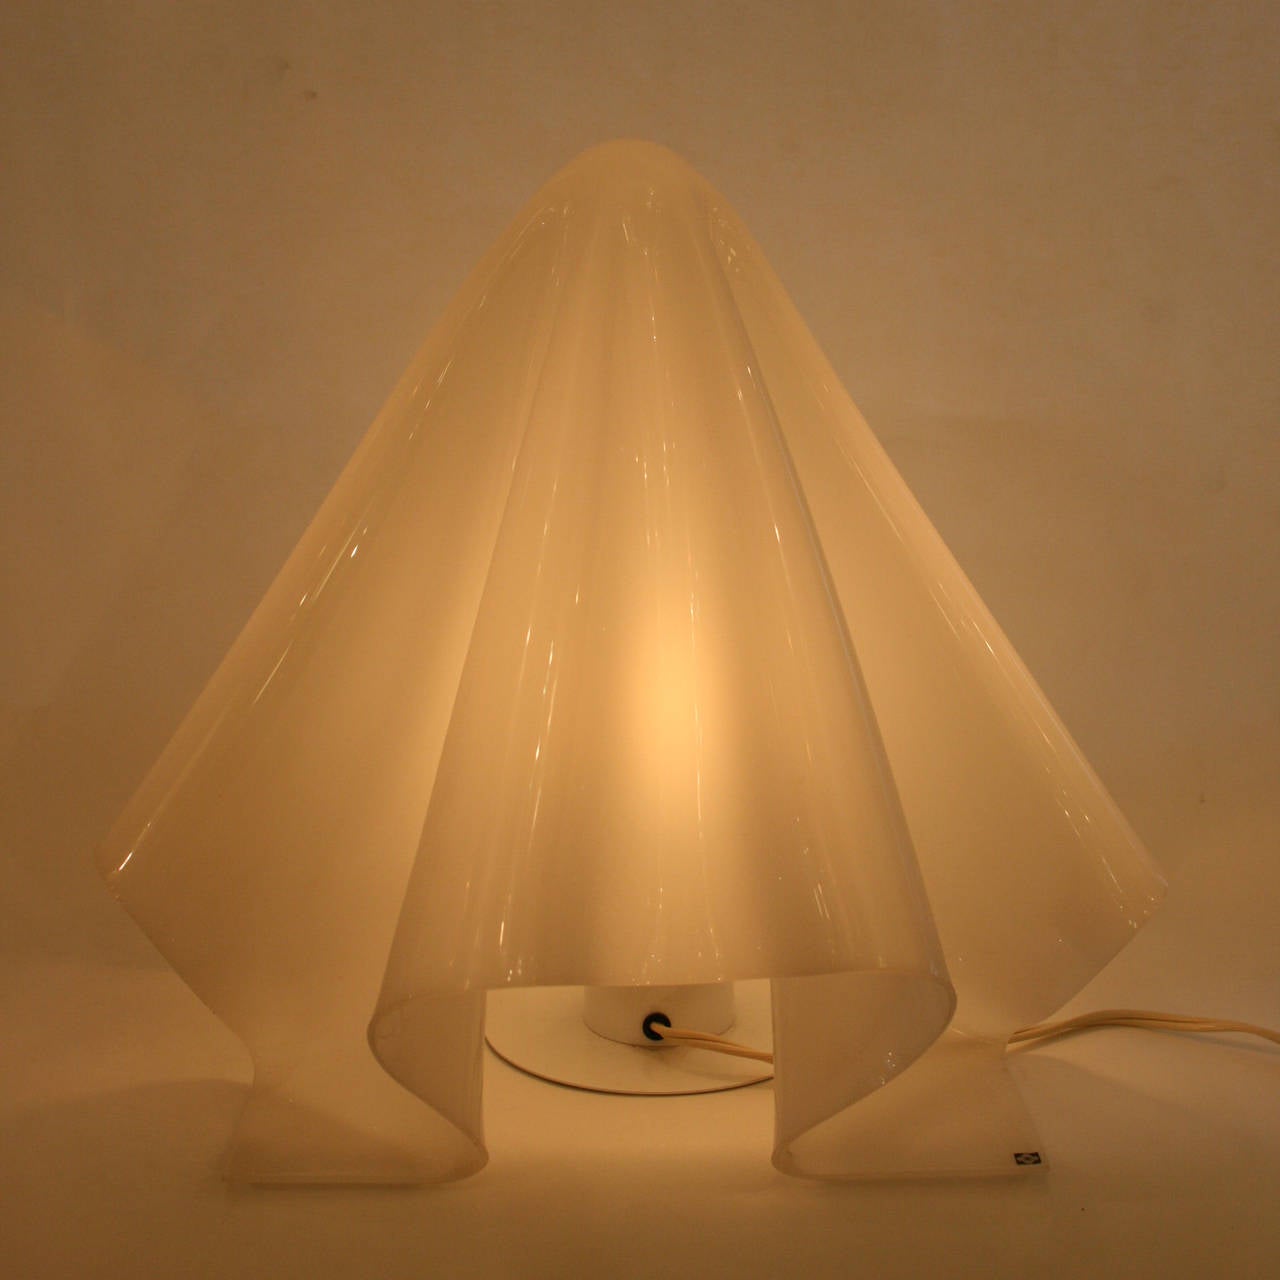 Molded acrylic shade. Made in Japan

Manufactured by Yamagiwa.